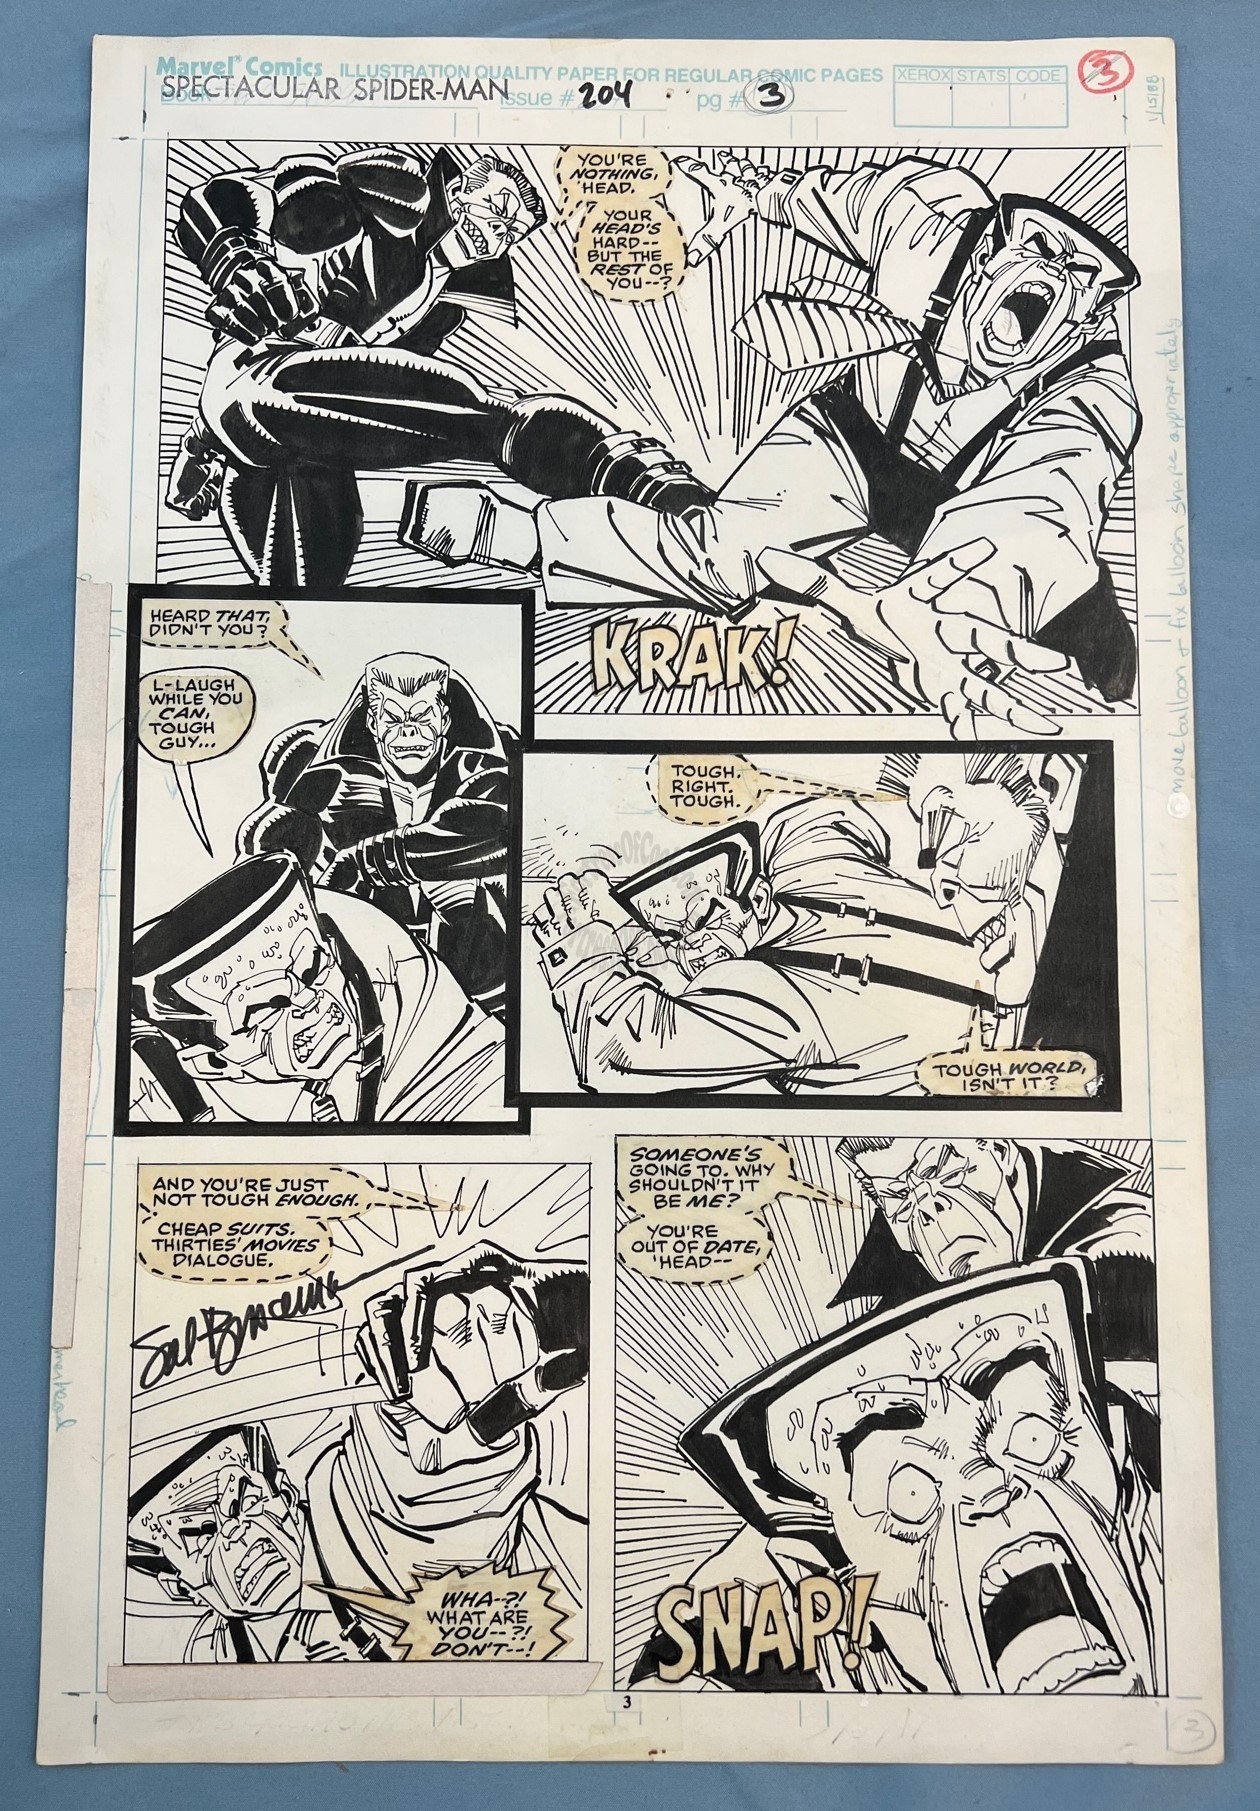 SPECTACULAR SPIDER-MAN #204 - PAGE 3 - SIGNED ORIGINAL ART - SAL BUSCEMA - HAMMERHEAD VS TOMBSTONE